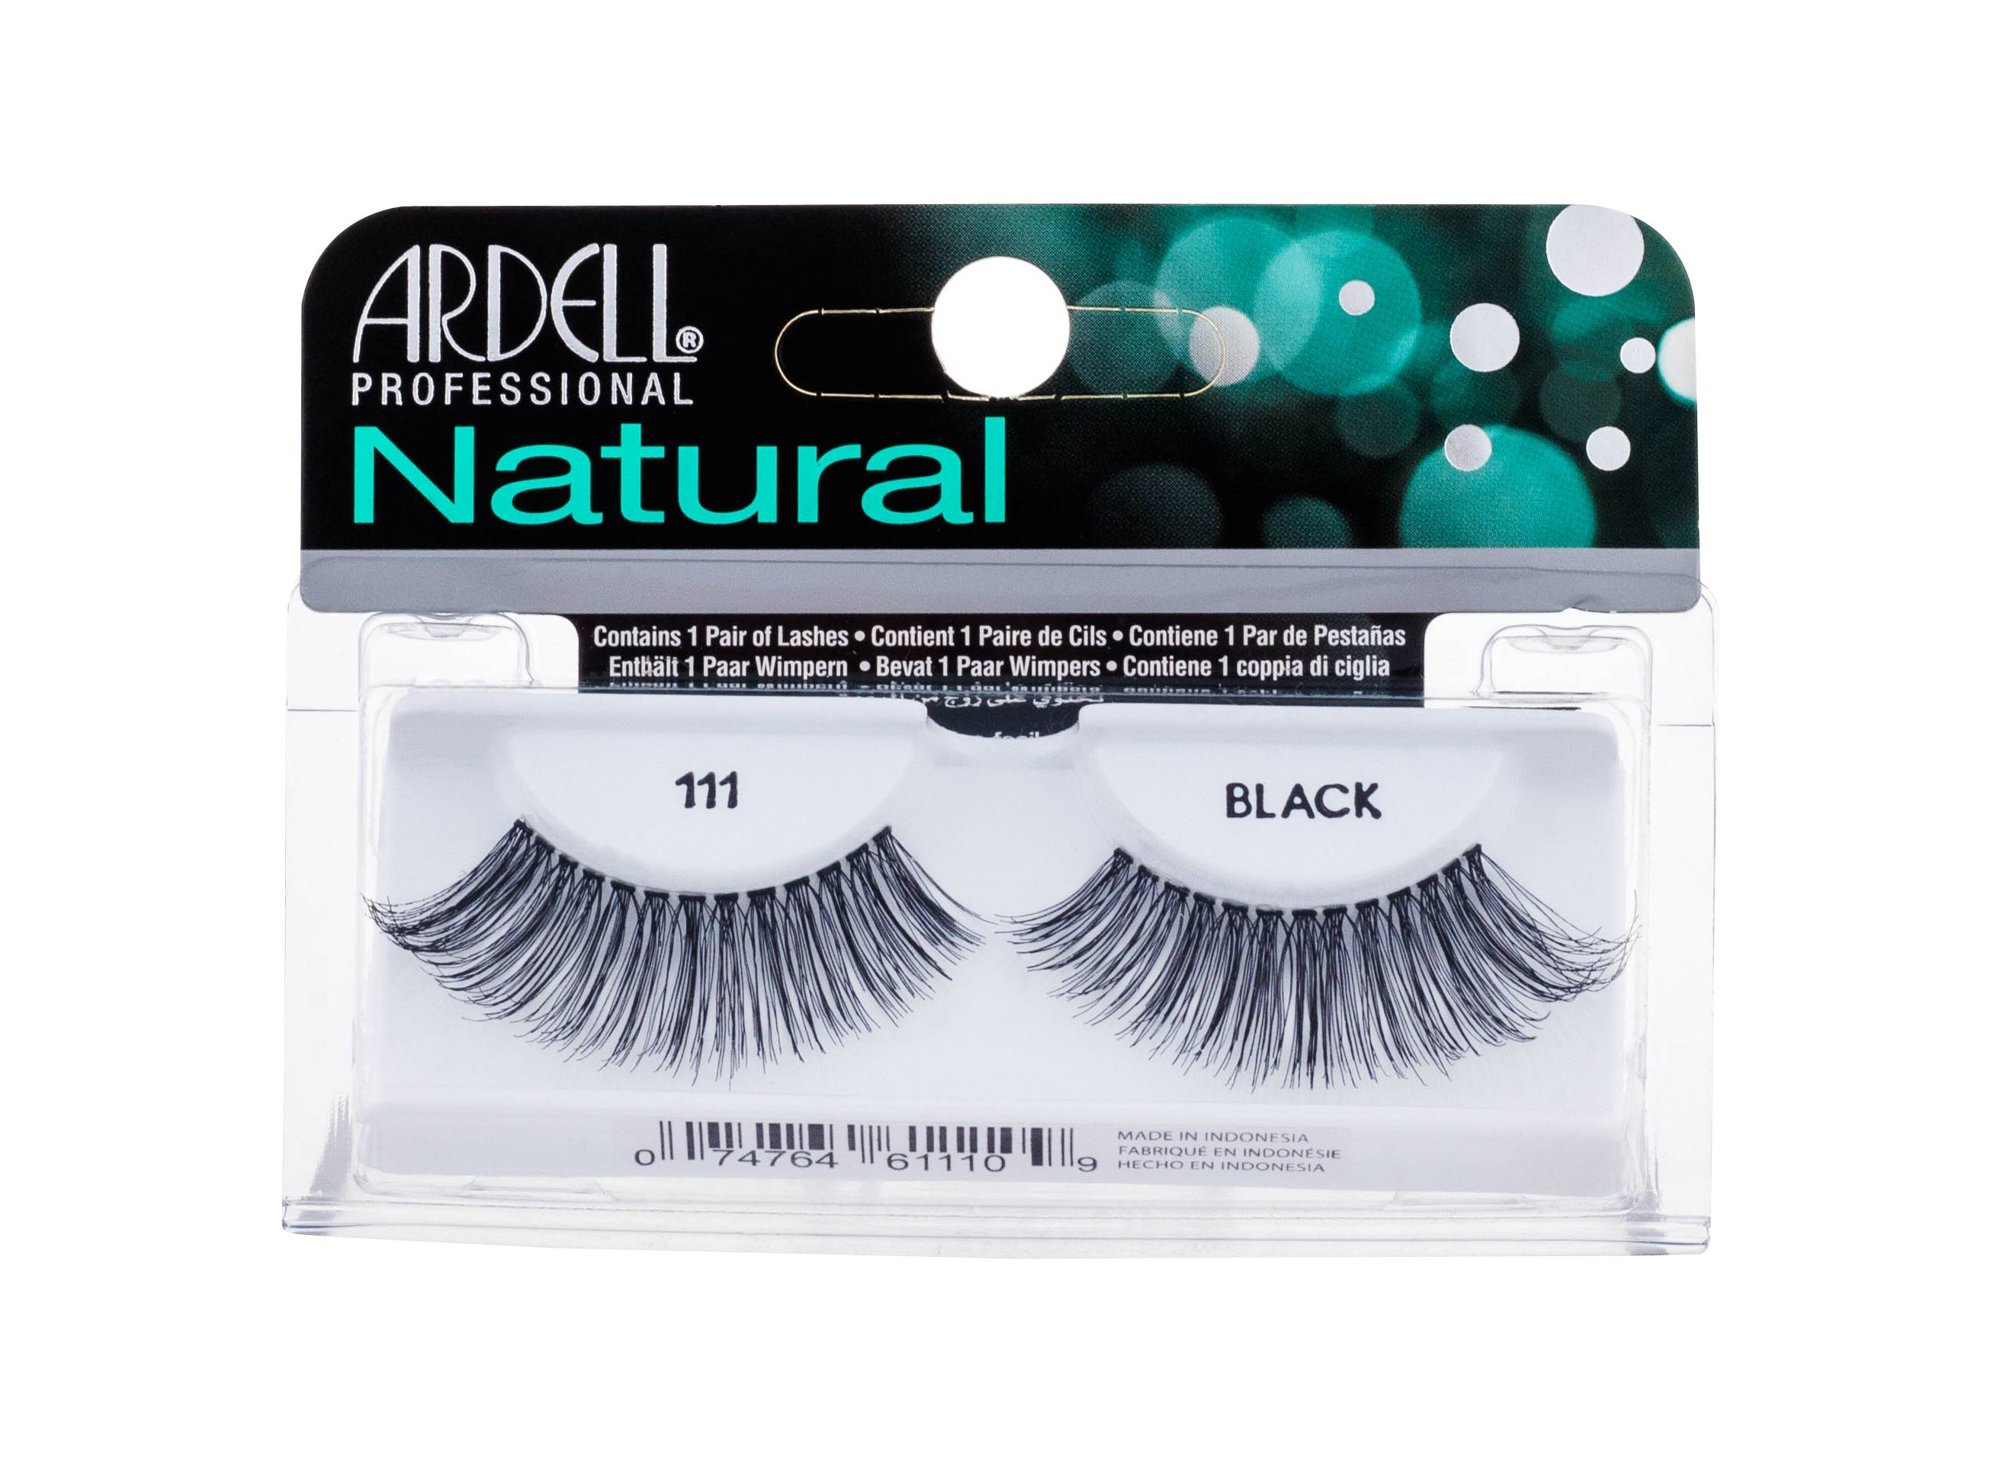 Ardell Natural